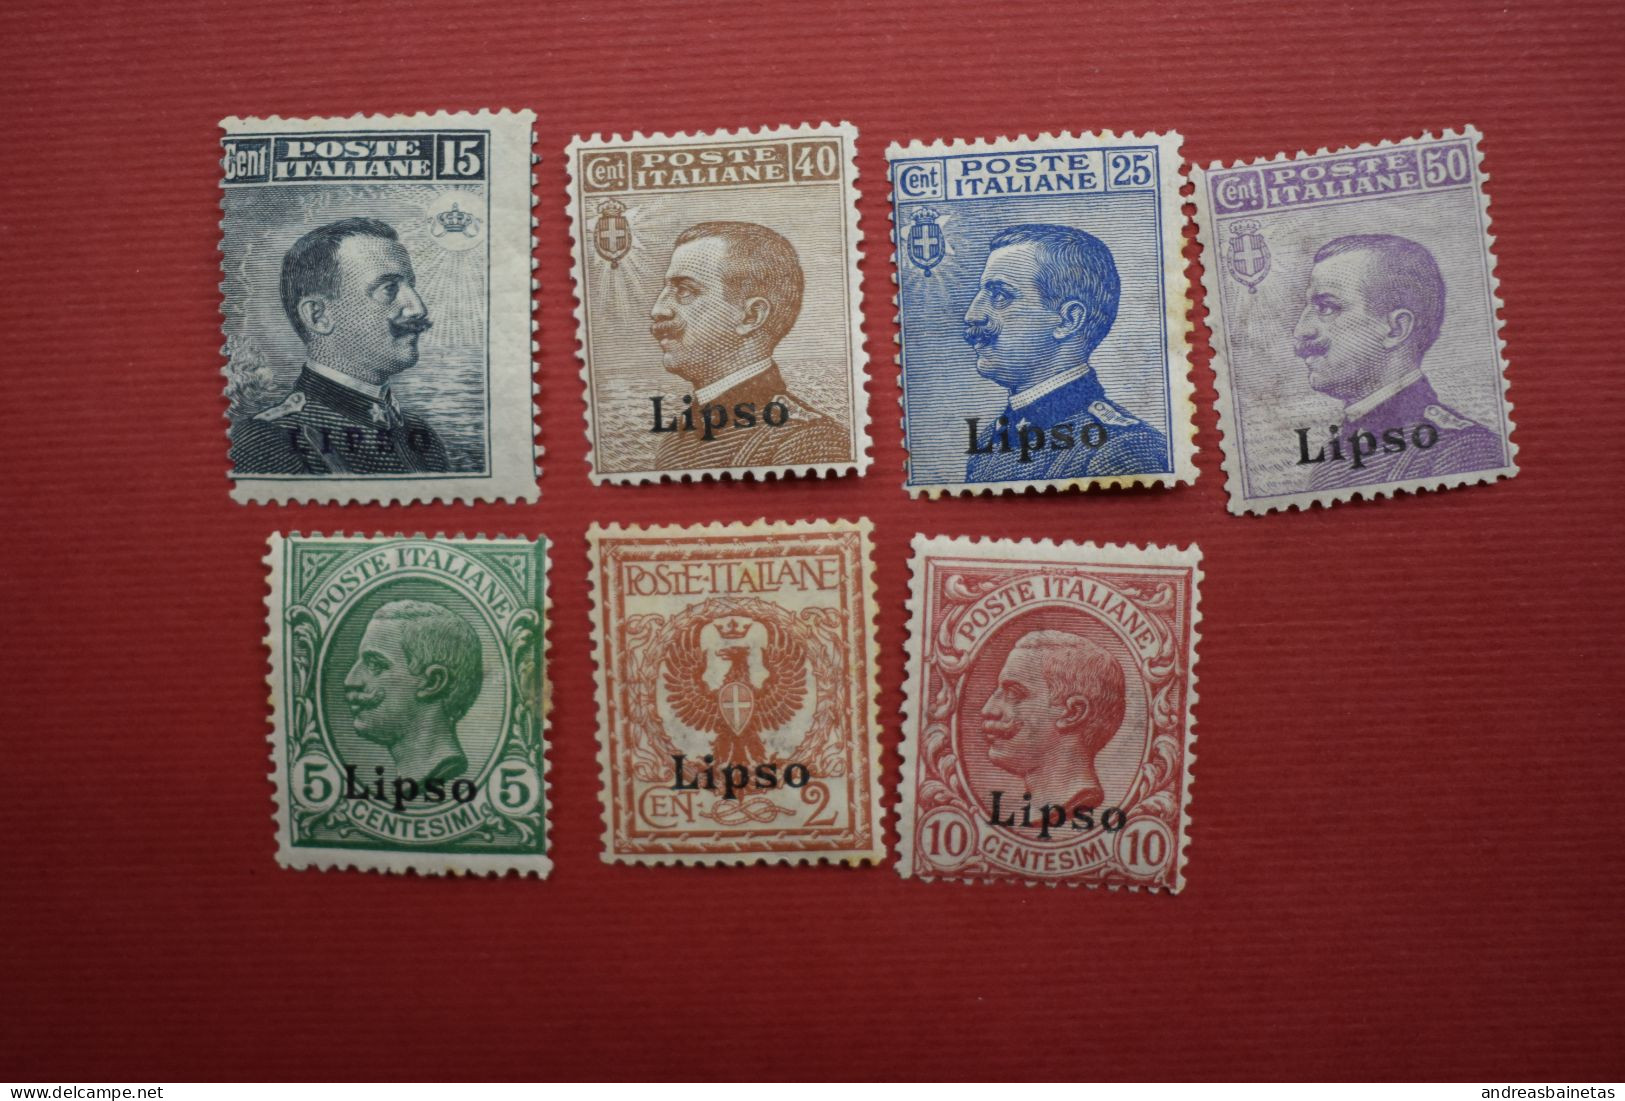 Stamps Greece ITALIAN OCCUPATION - ITALIAN POST 1912 "LIPSO" Ovpt, Complete Set Of 7 Values, M. (Hellas 3VII/9VII). - Dodekanesos